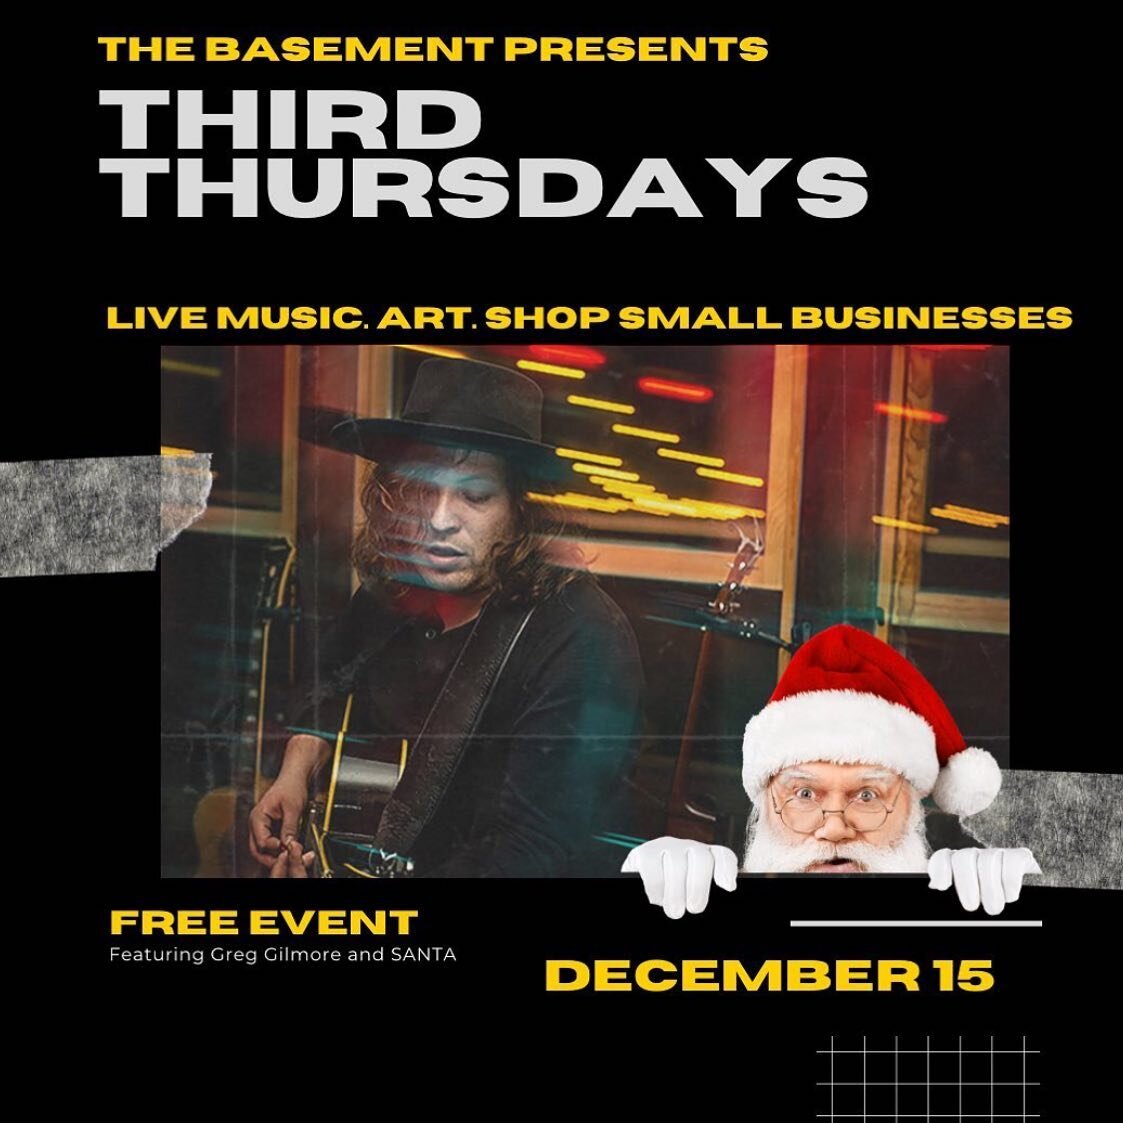 Don&rsquo;t miss this Thursday! Our Third Thursday is almost here! That means shopping, Santa!!, LIVE music and so much more!!!🎅🏼
Tag someone who needs to know👇🏼